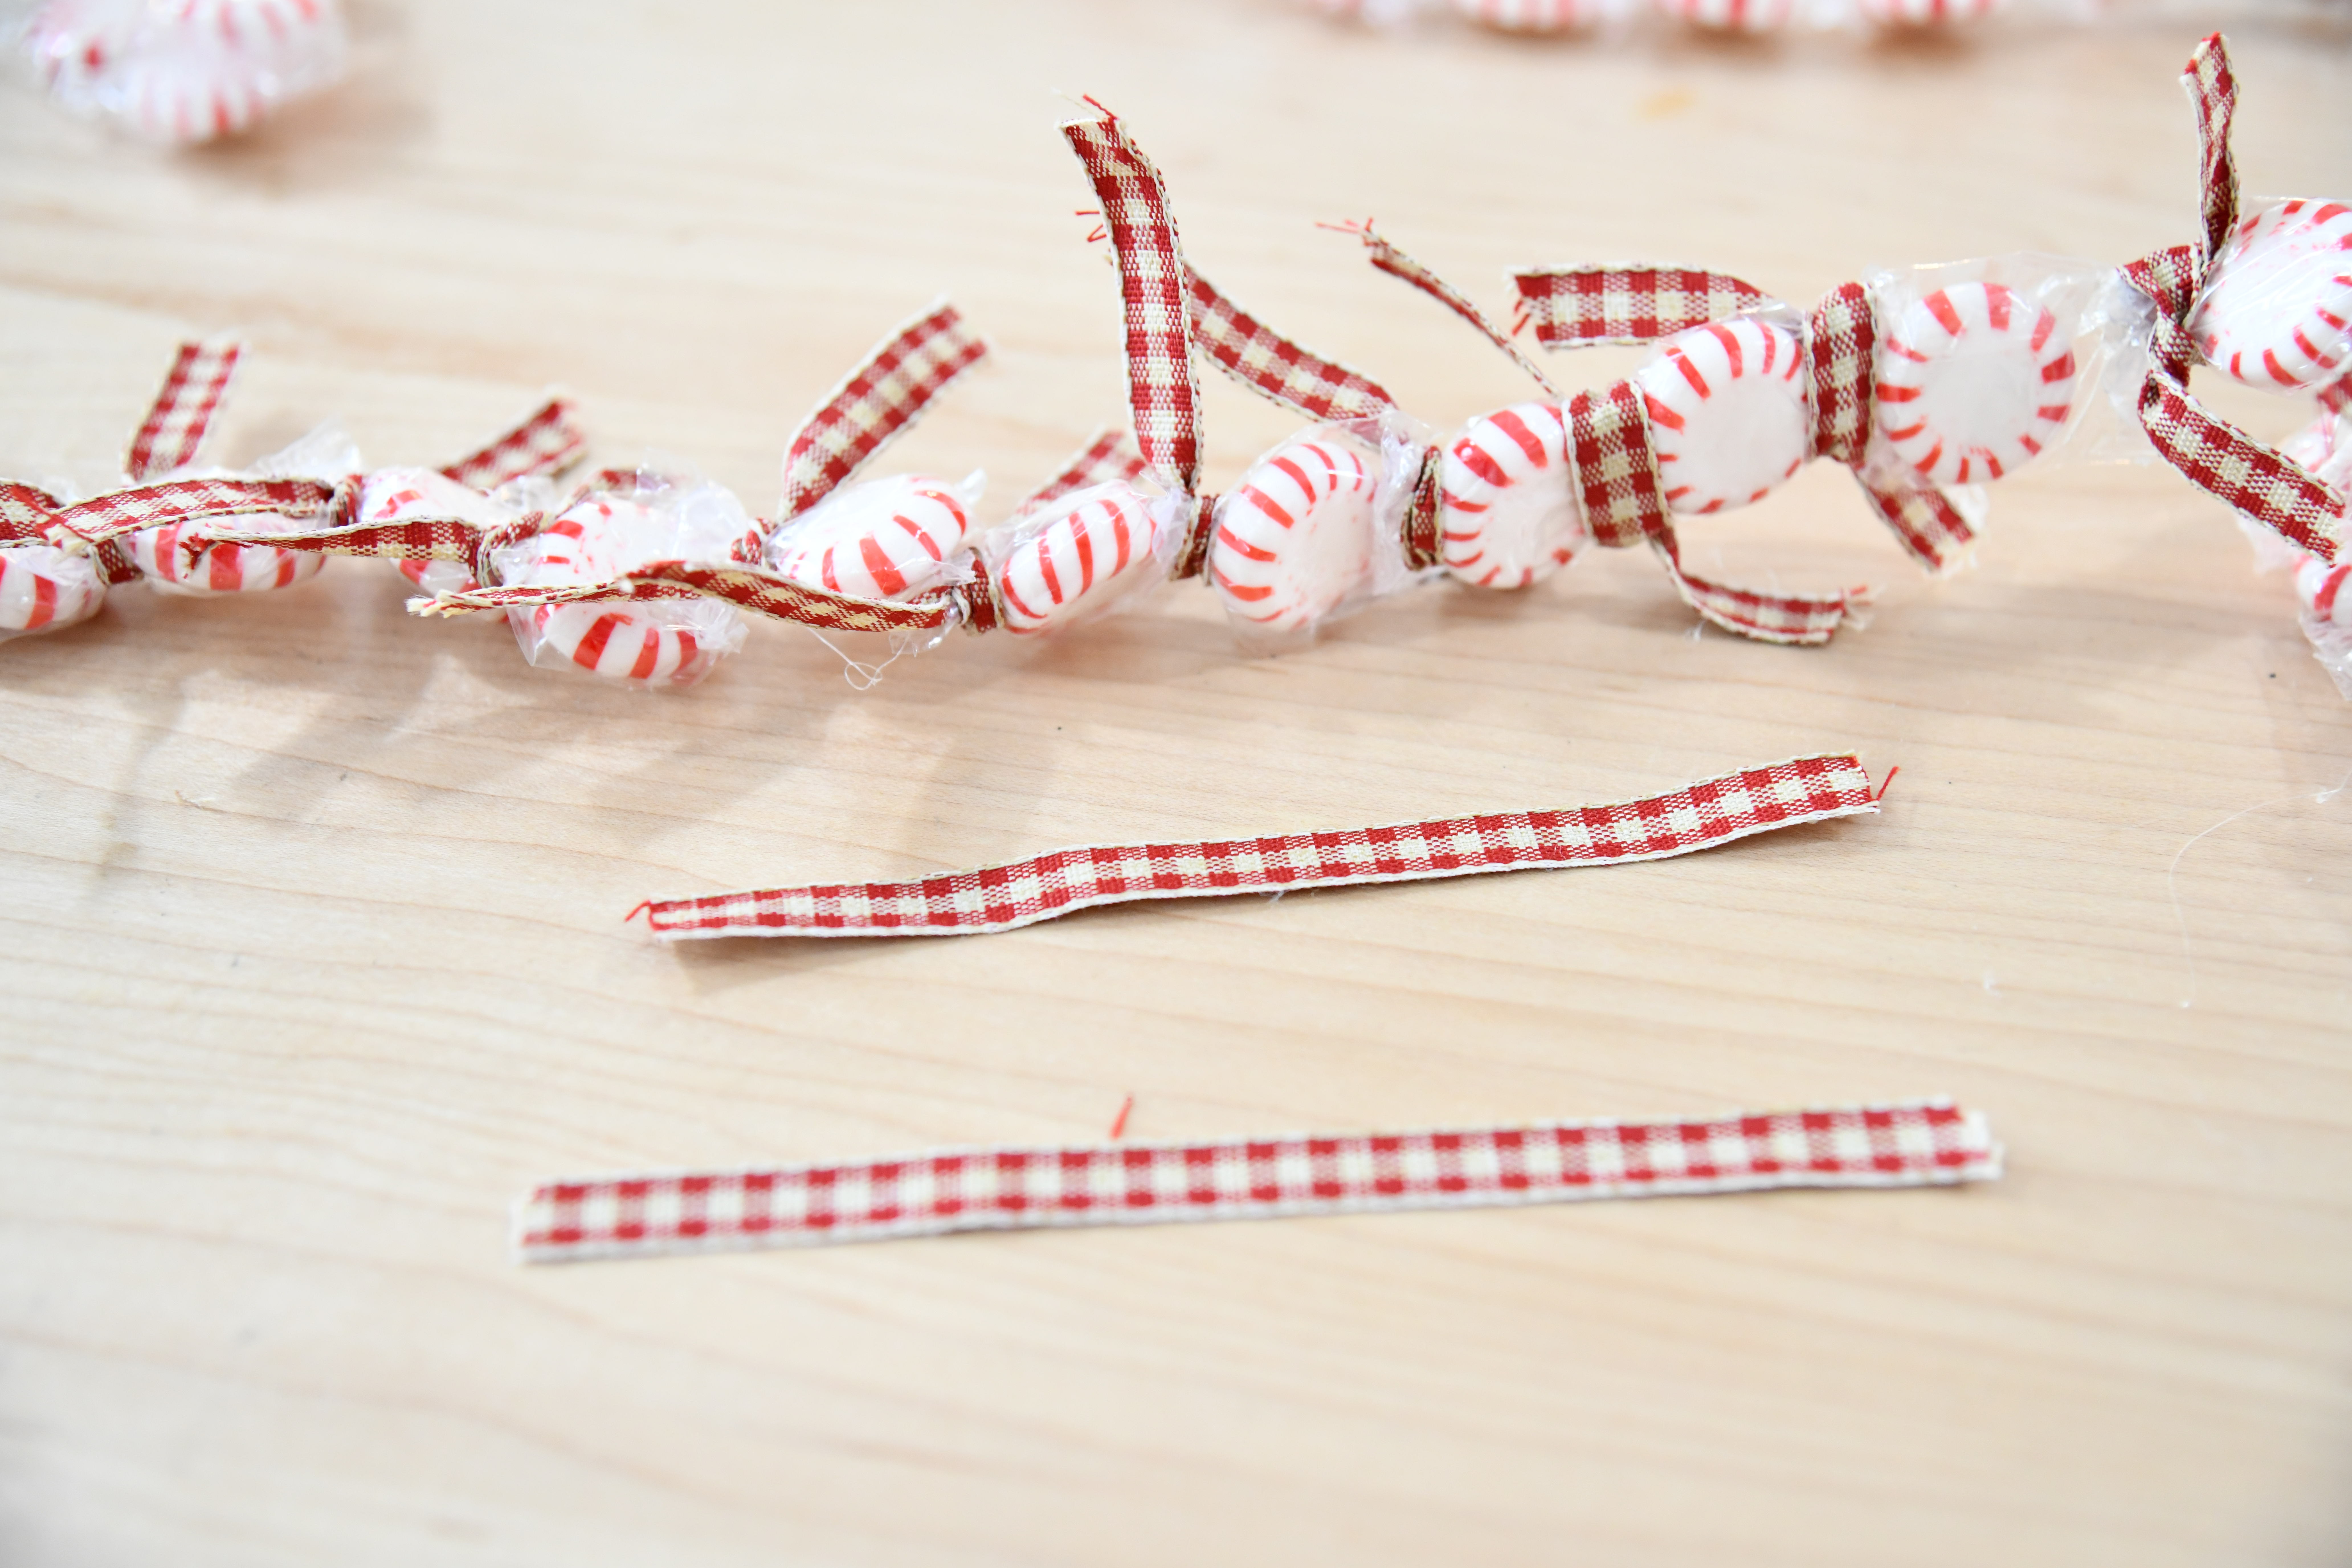 Ribbon Tied on Candy Garland